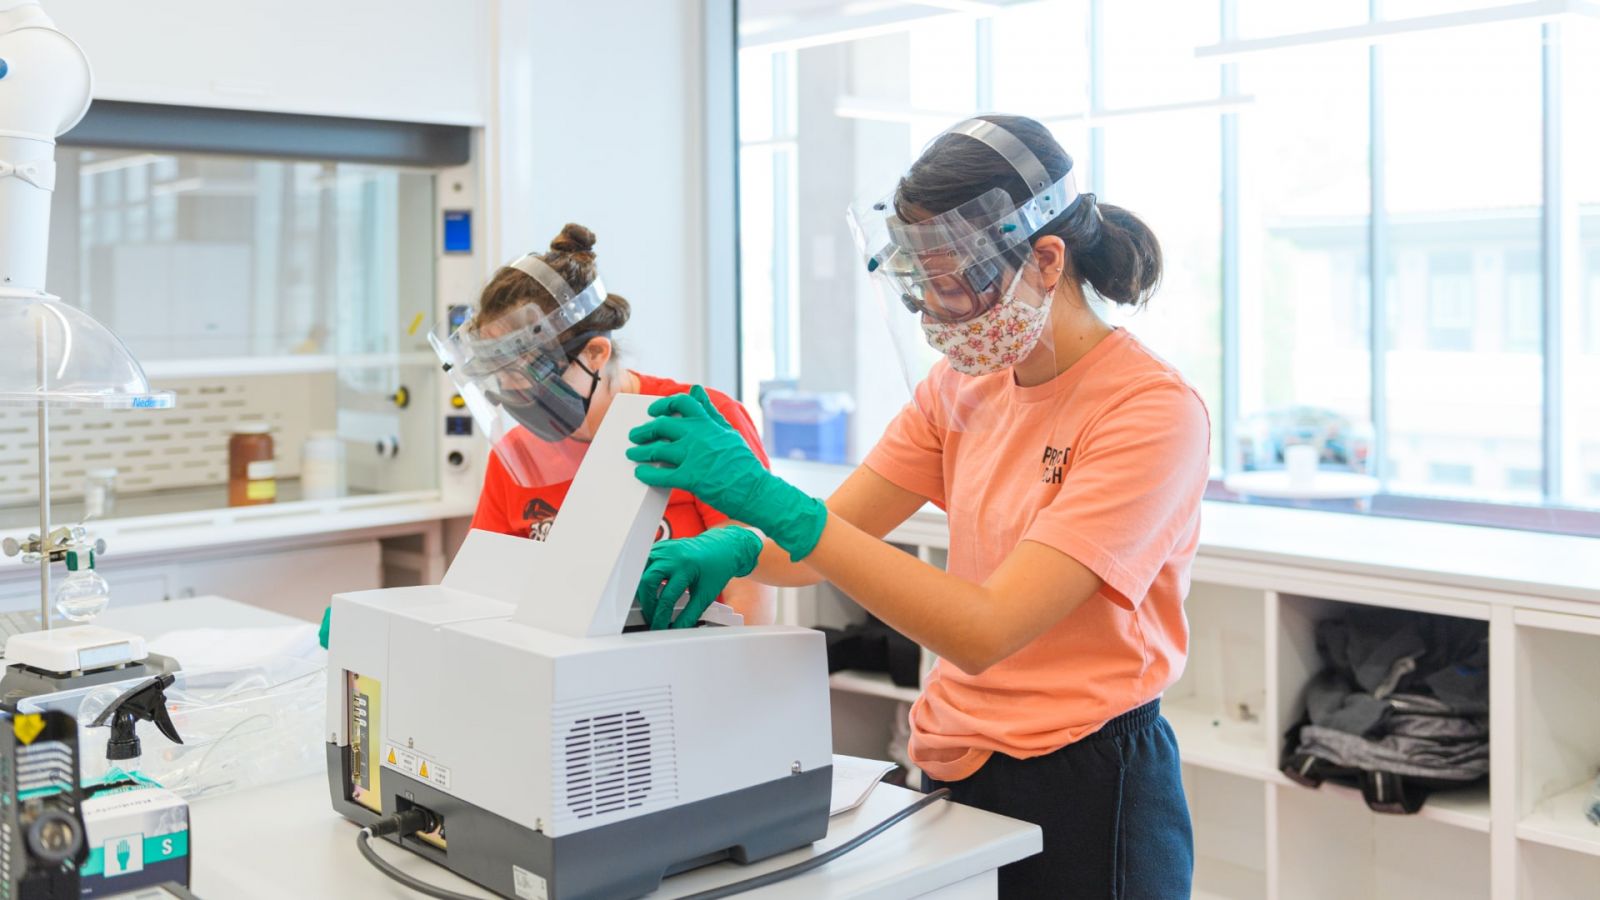 Purdue students work through research projects in a campus lab. A new partnership between Purdue and Butler University is focused on education innovation, including creation of new curriculum between fields of research. (Purdue University photo)